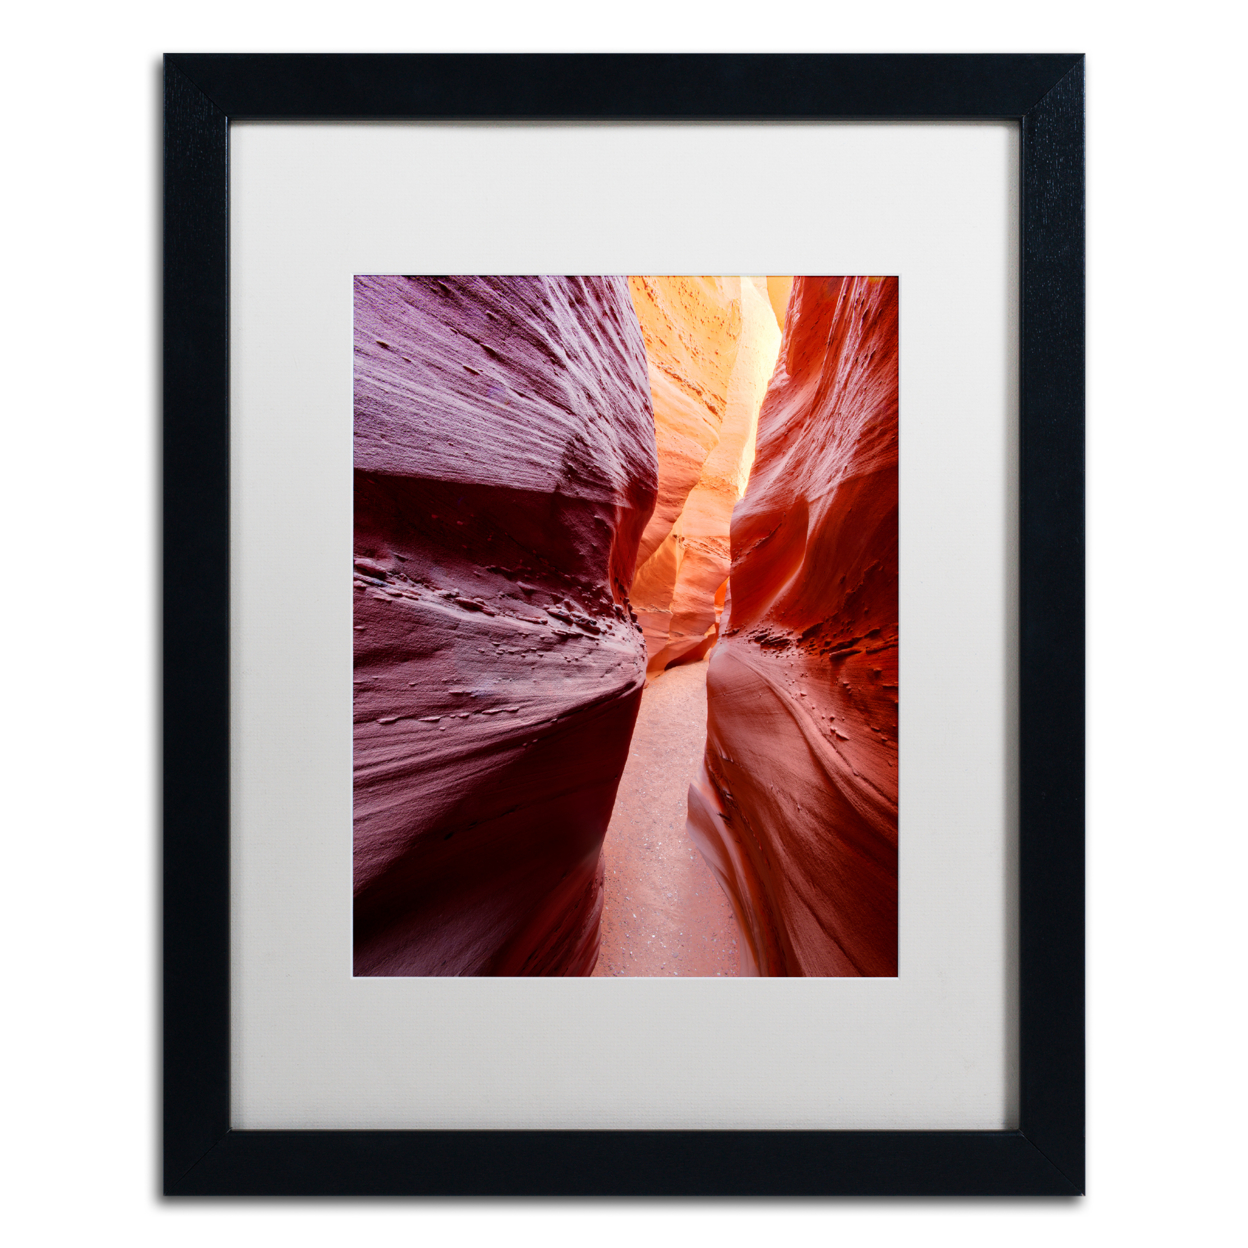 Michael Blanchette Photography 'Earth Slice' Black Wooden Framed Art 18 X 22 Inches